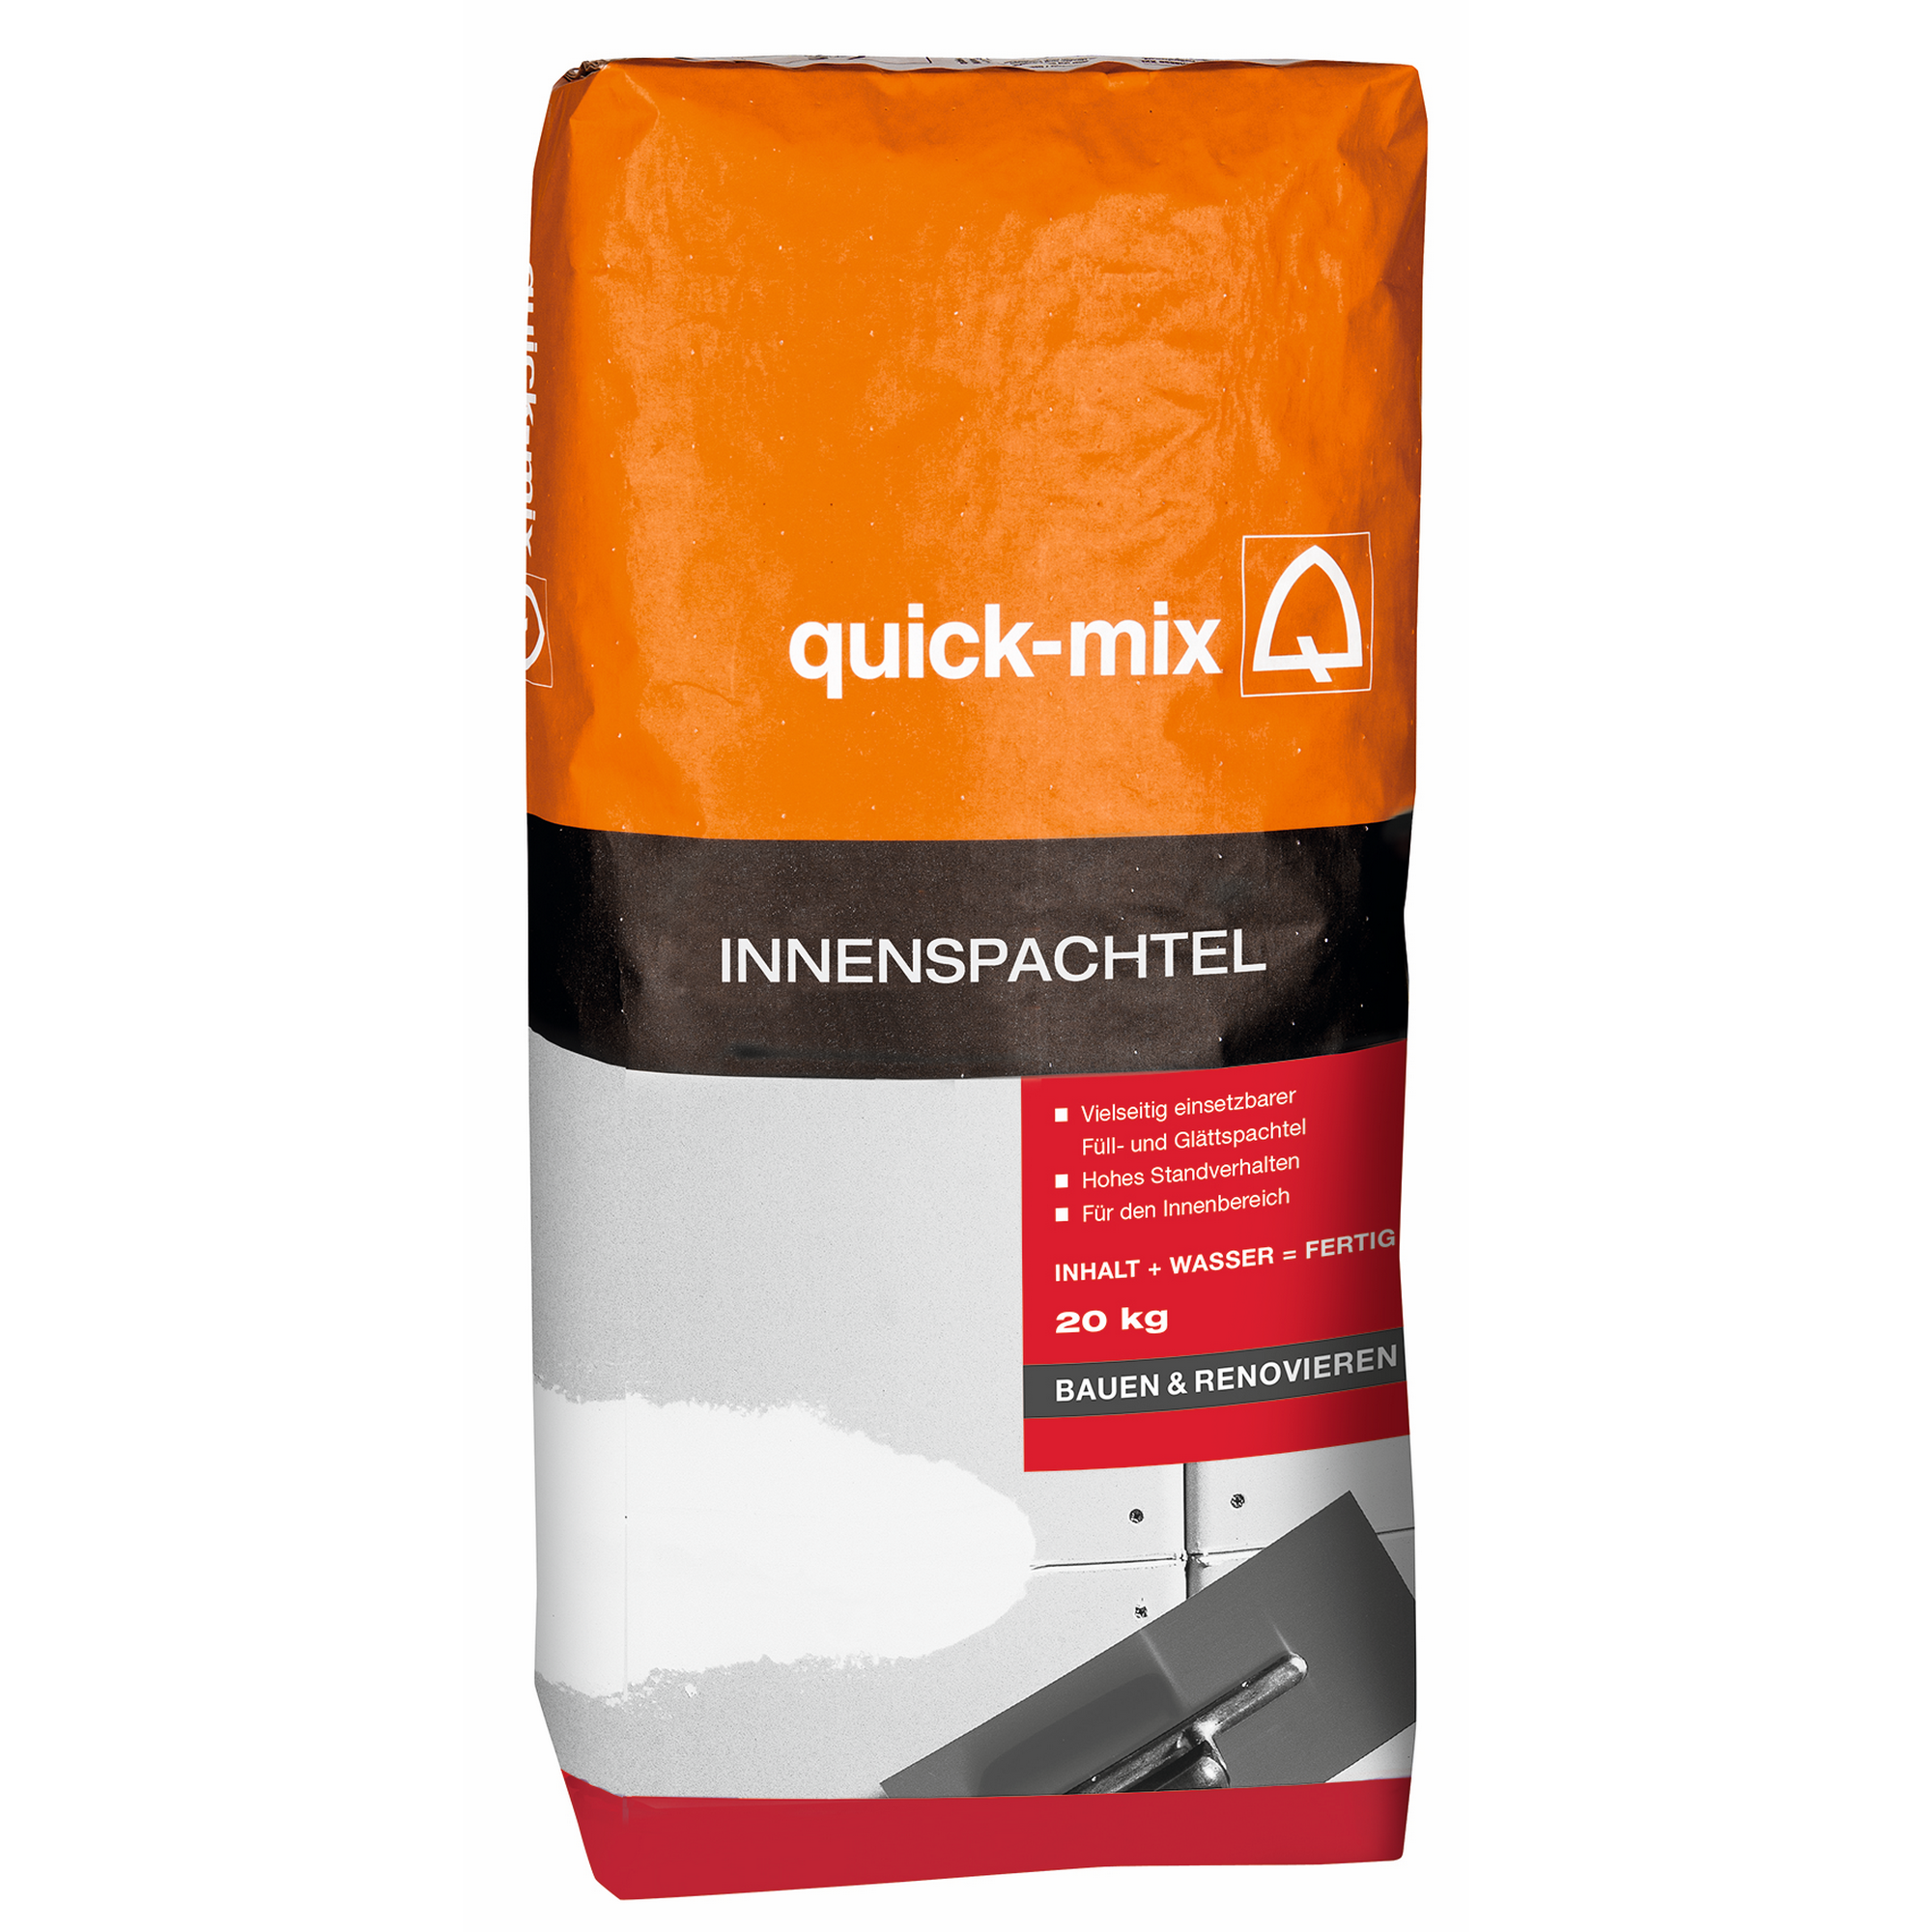 Innenspachtel 20 kg + product picture